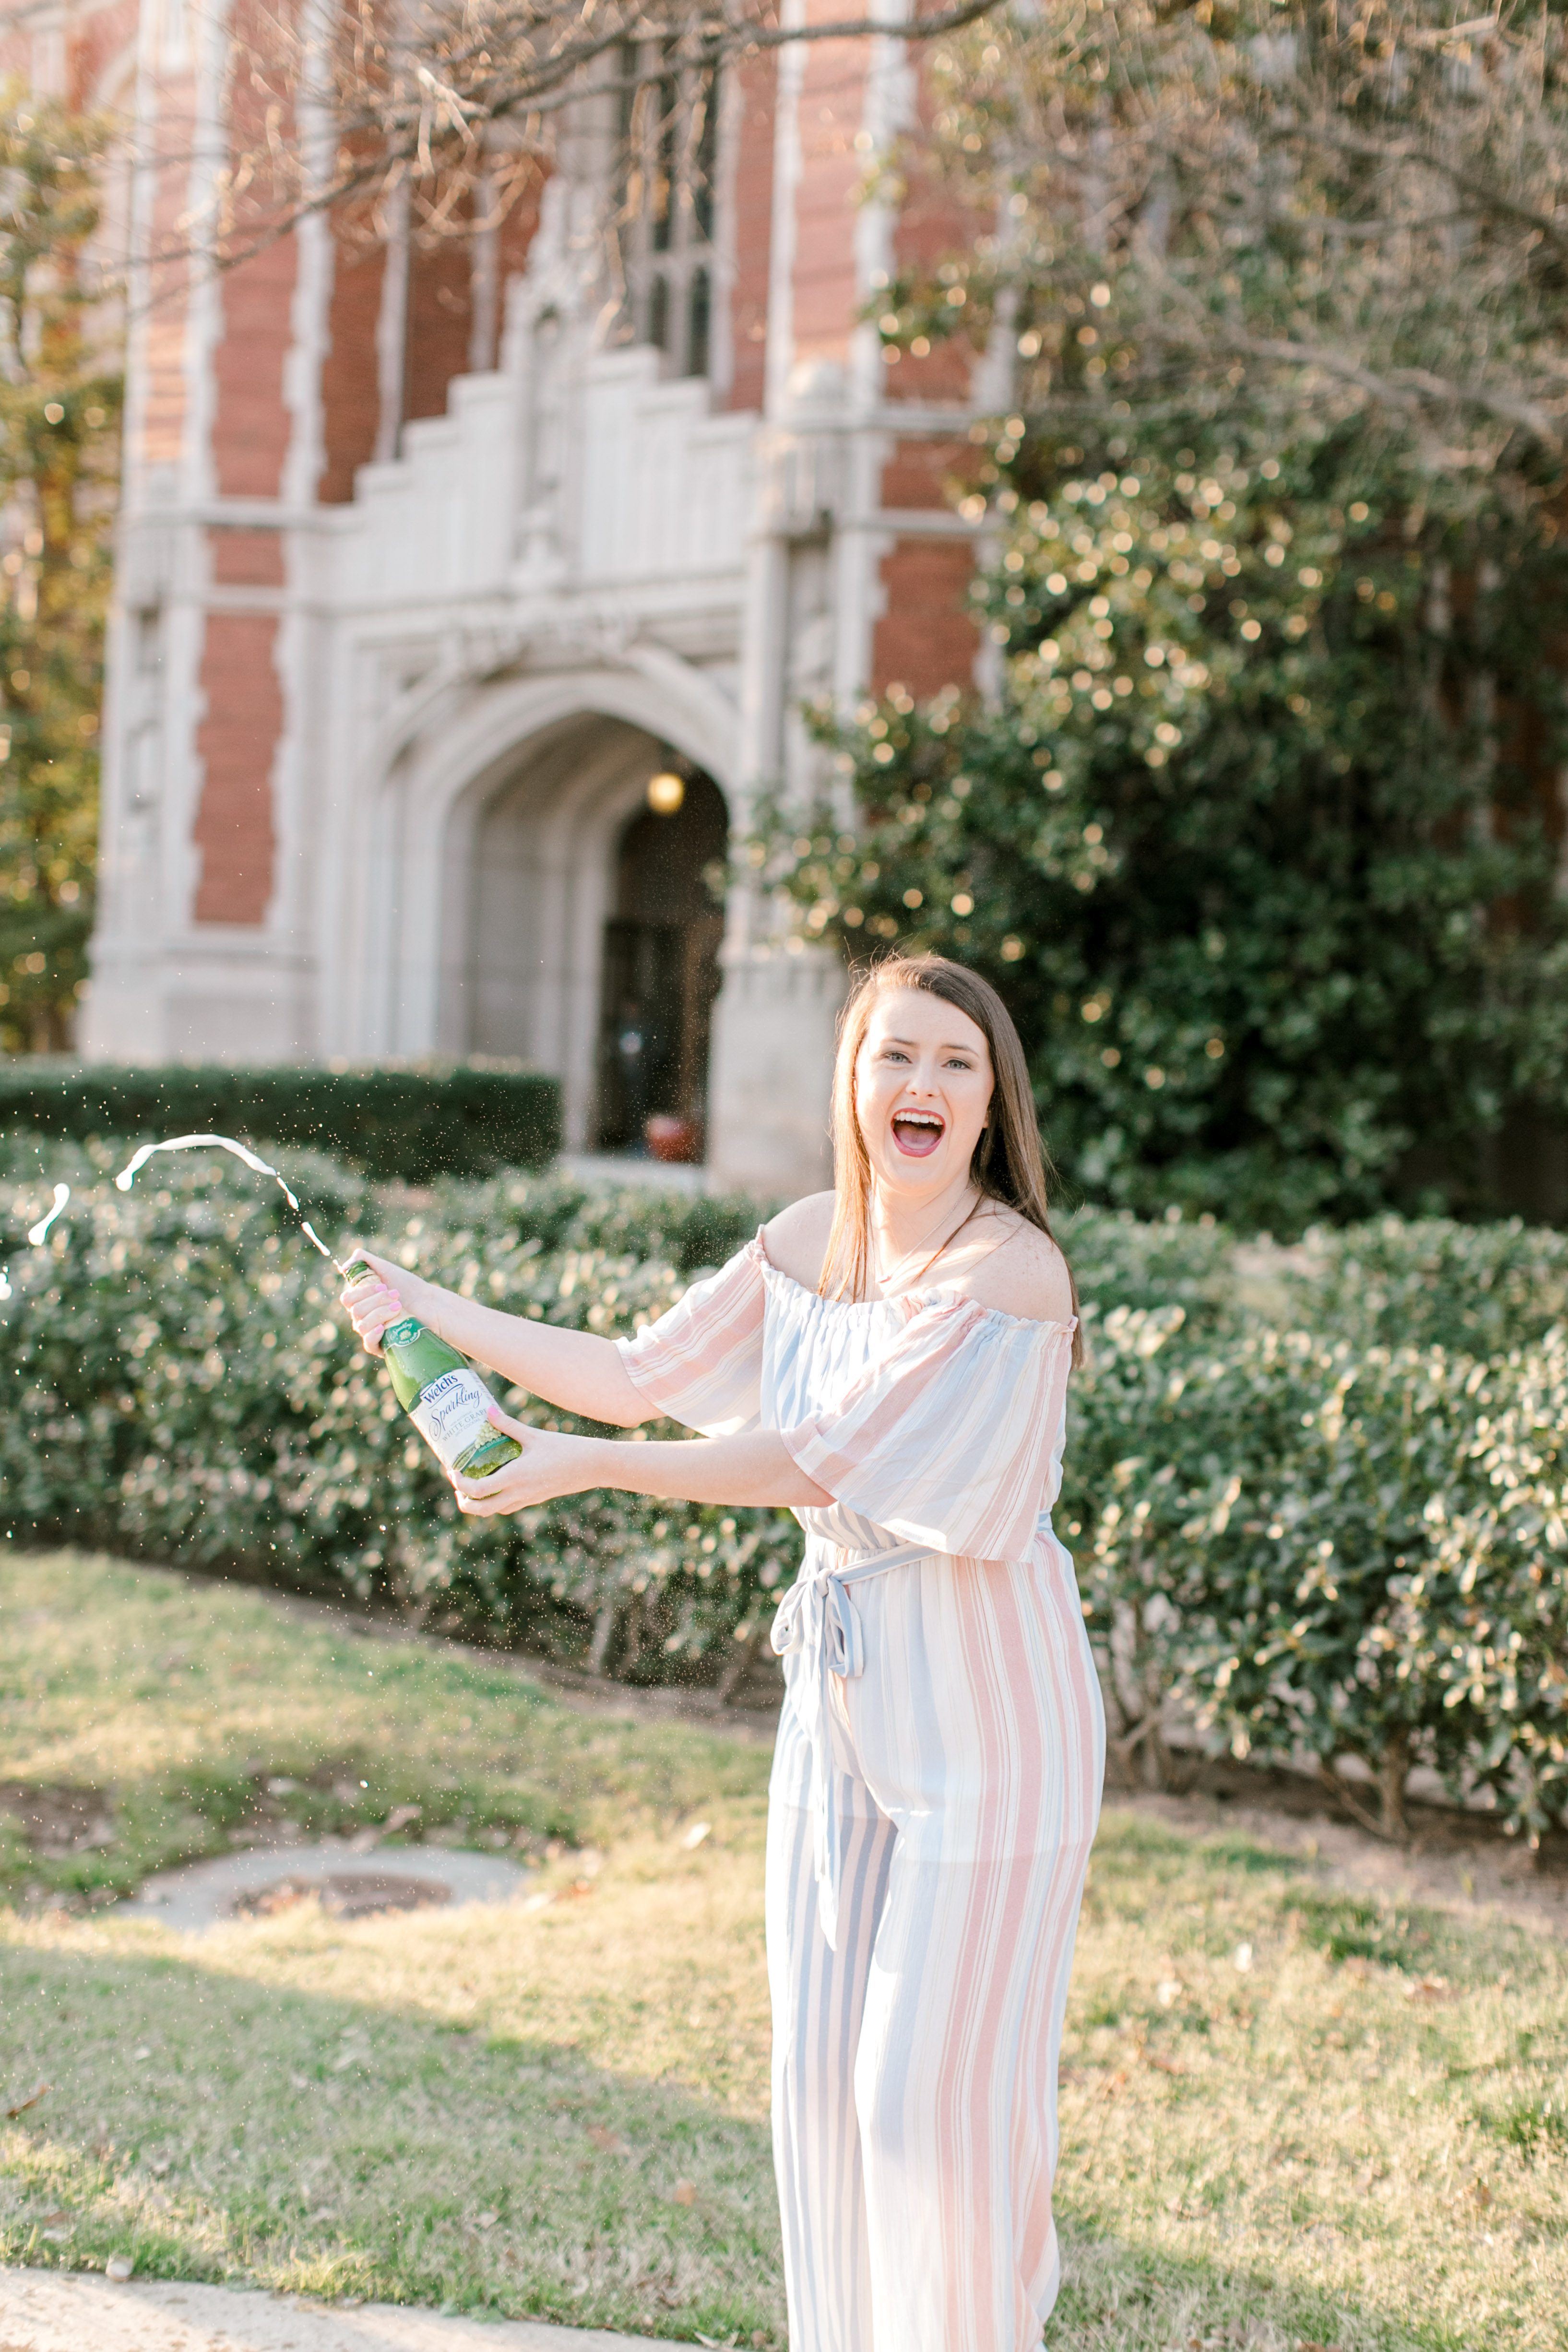 ou senior taking celebratory photos by popping bottle of sparkling cider in front of the bizz